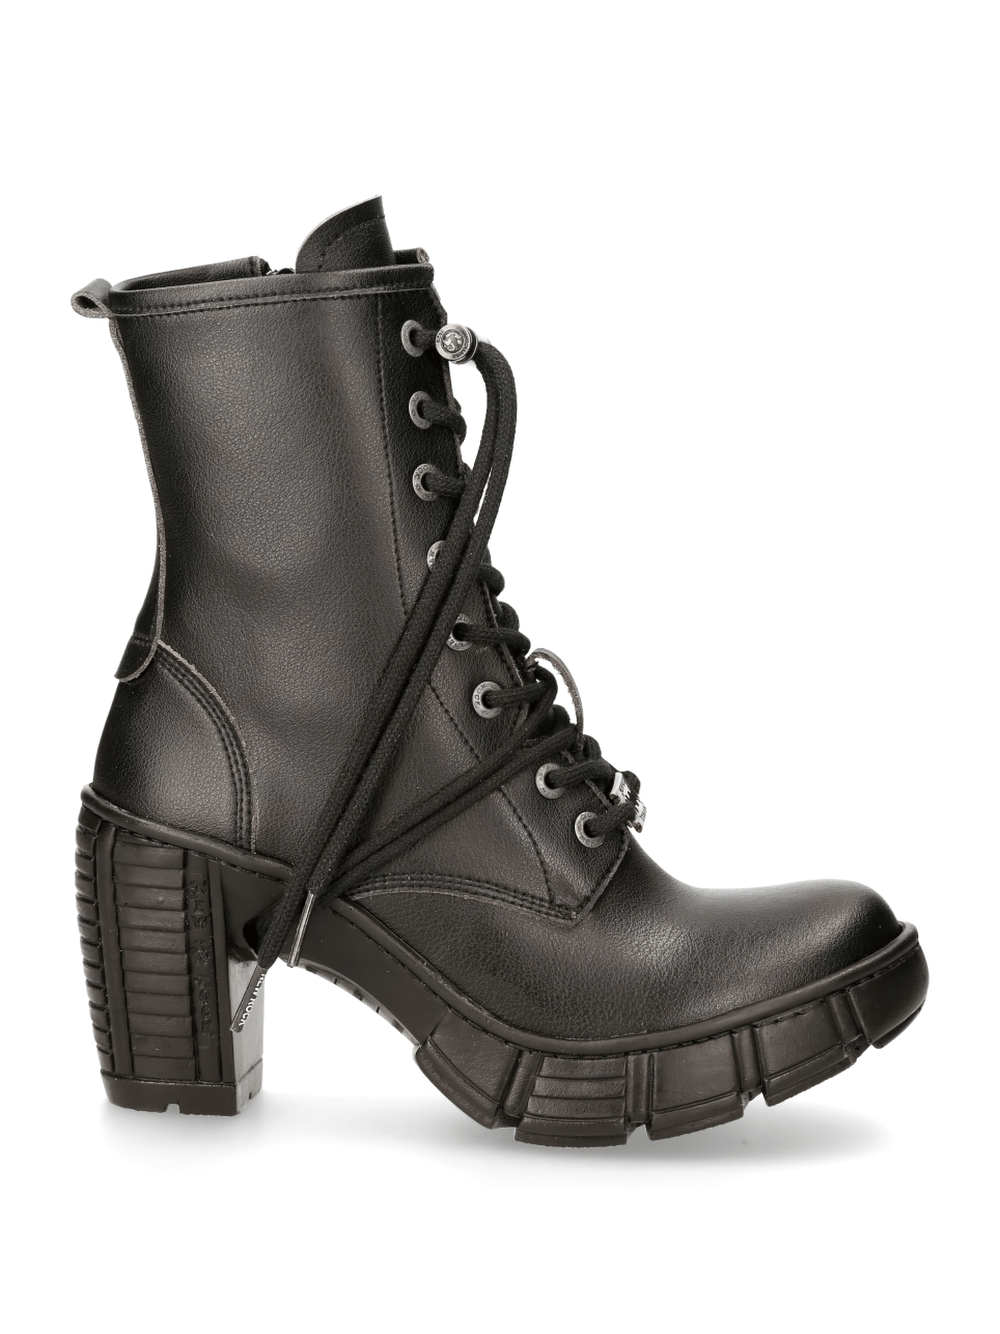 NEW ROCK Edgy Black Ankle Boots with Metallic Accents